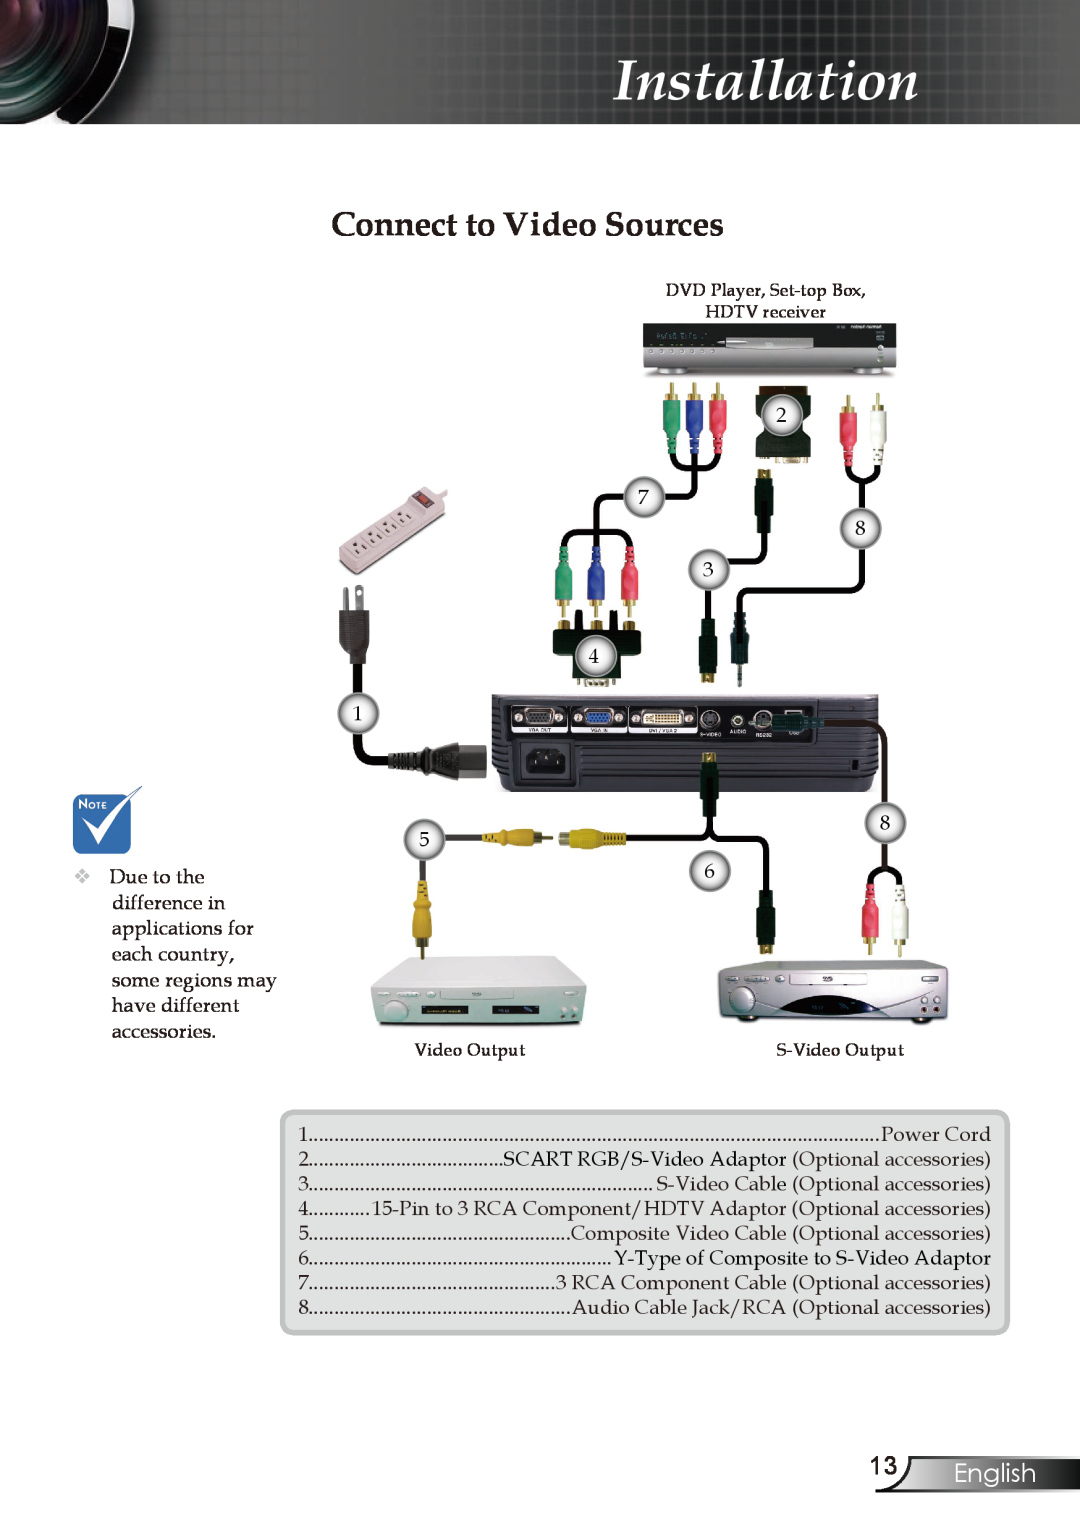 Optoma Technology EP727, EP728, EP723, EP721 manual Connect to Video Sources, English, Installation 